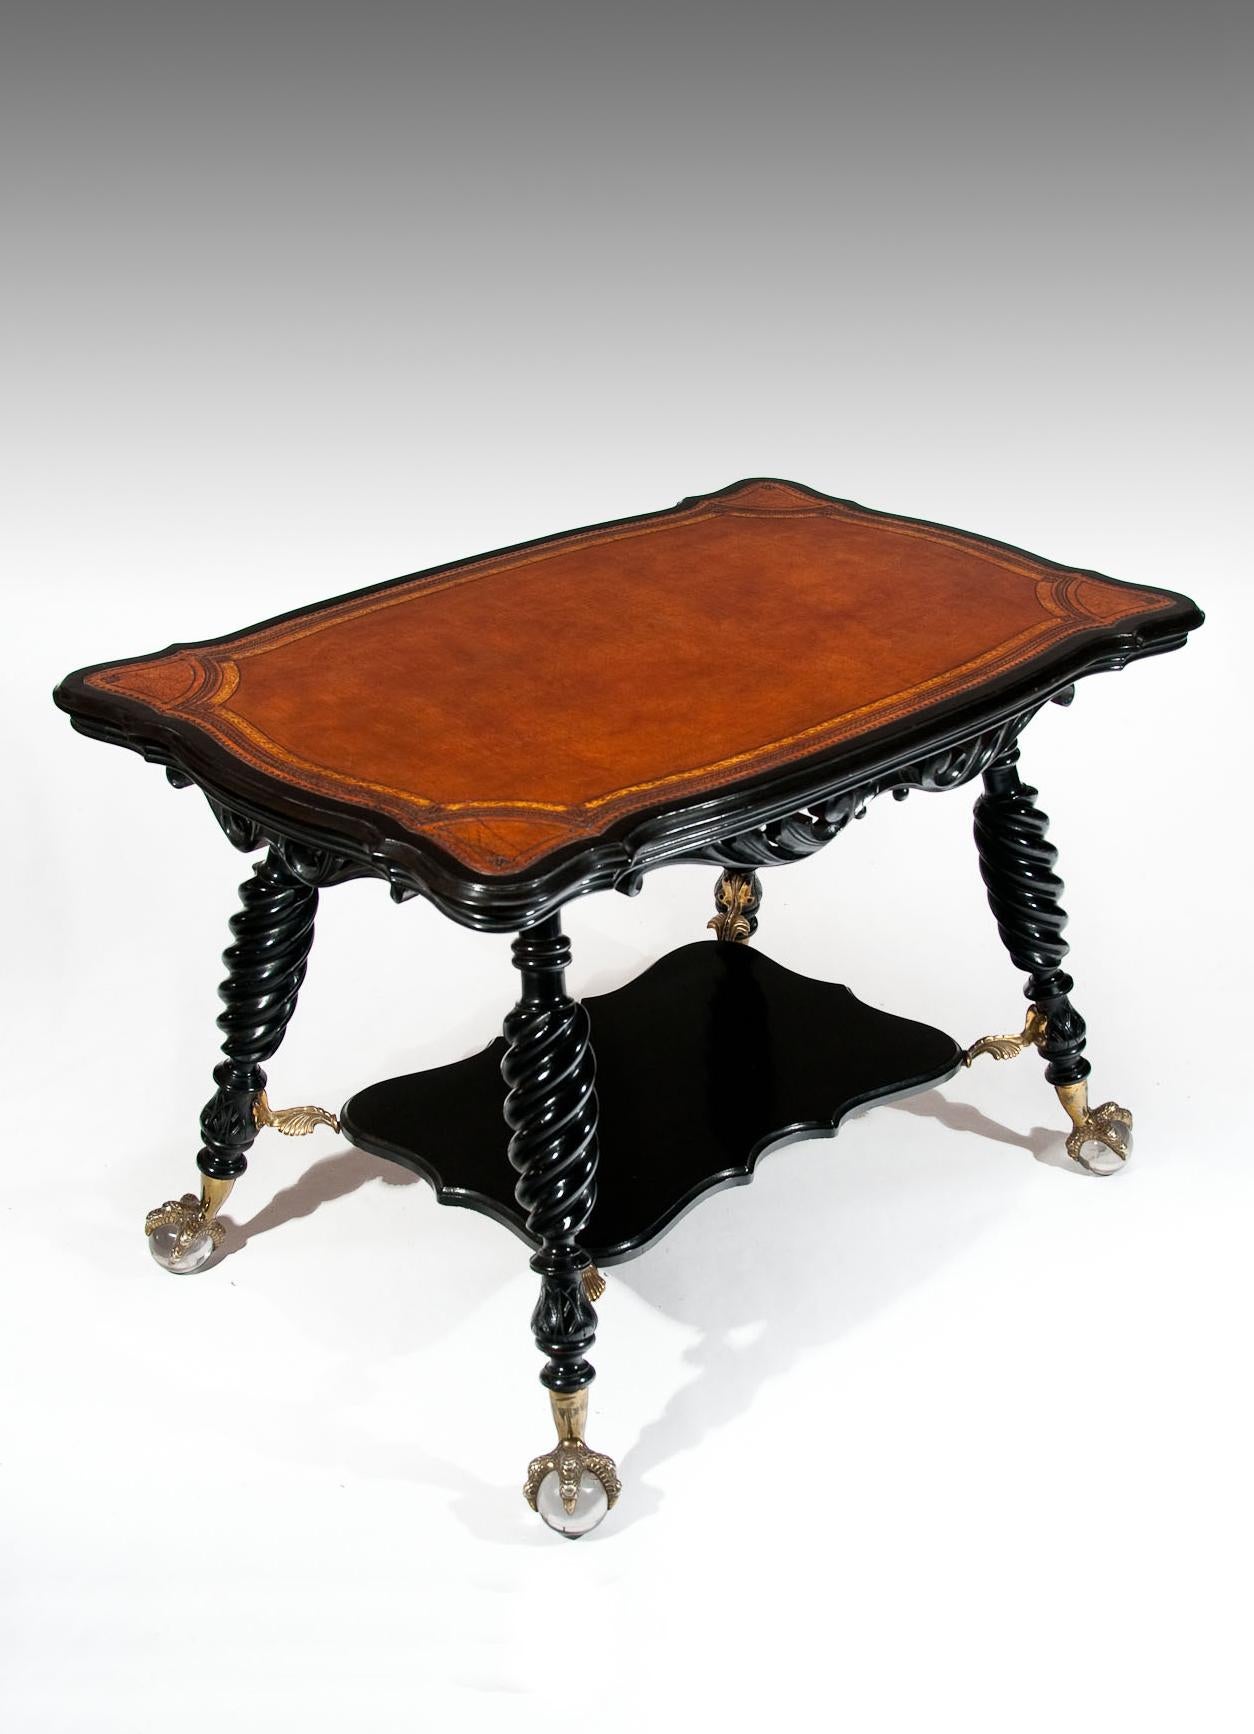 A quality and rare antique ebonized centre table.
The shaped top having a tan leather insert which is gilt and blind tooled with a neat small banding and central decorative shaped carving is supported by four turned and carved ebonized legs united